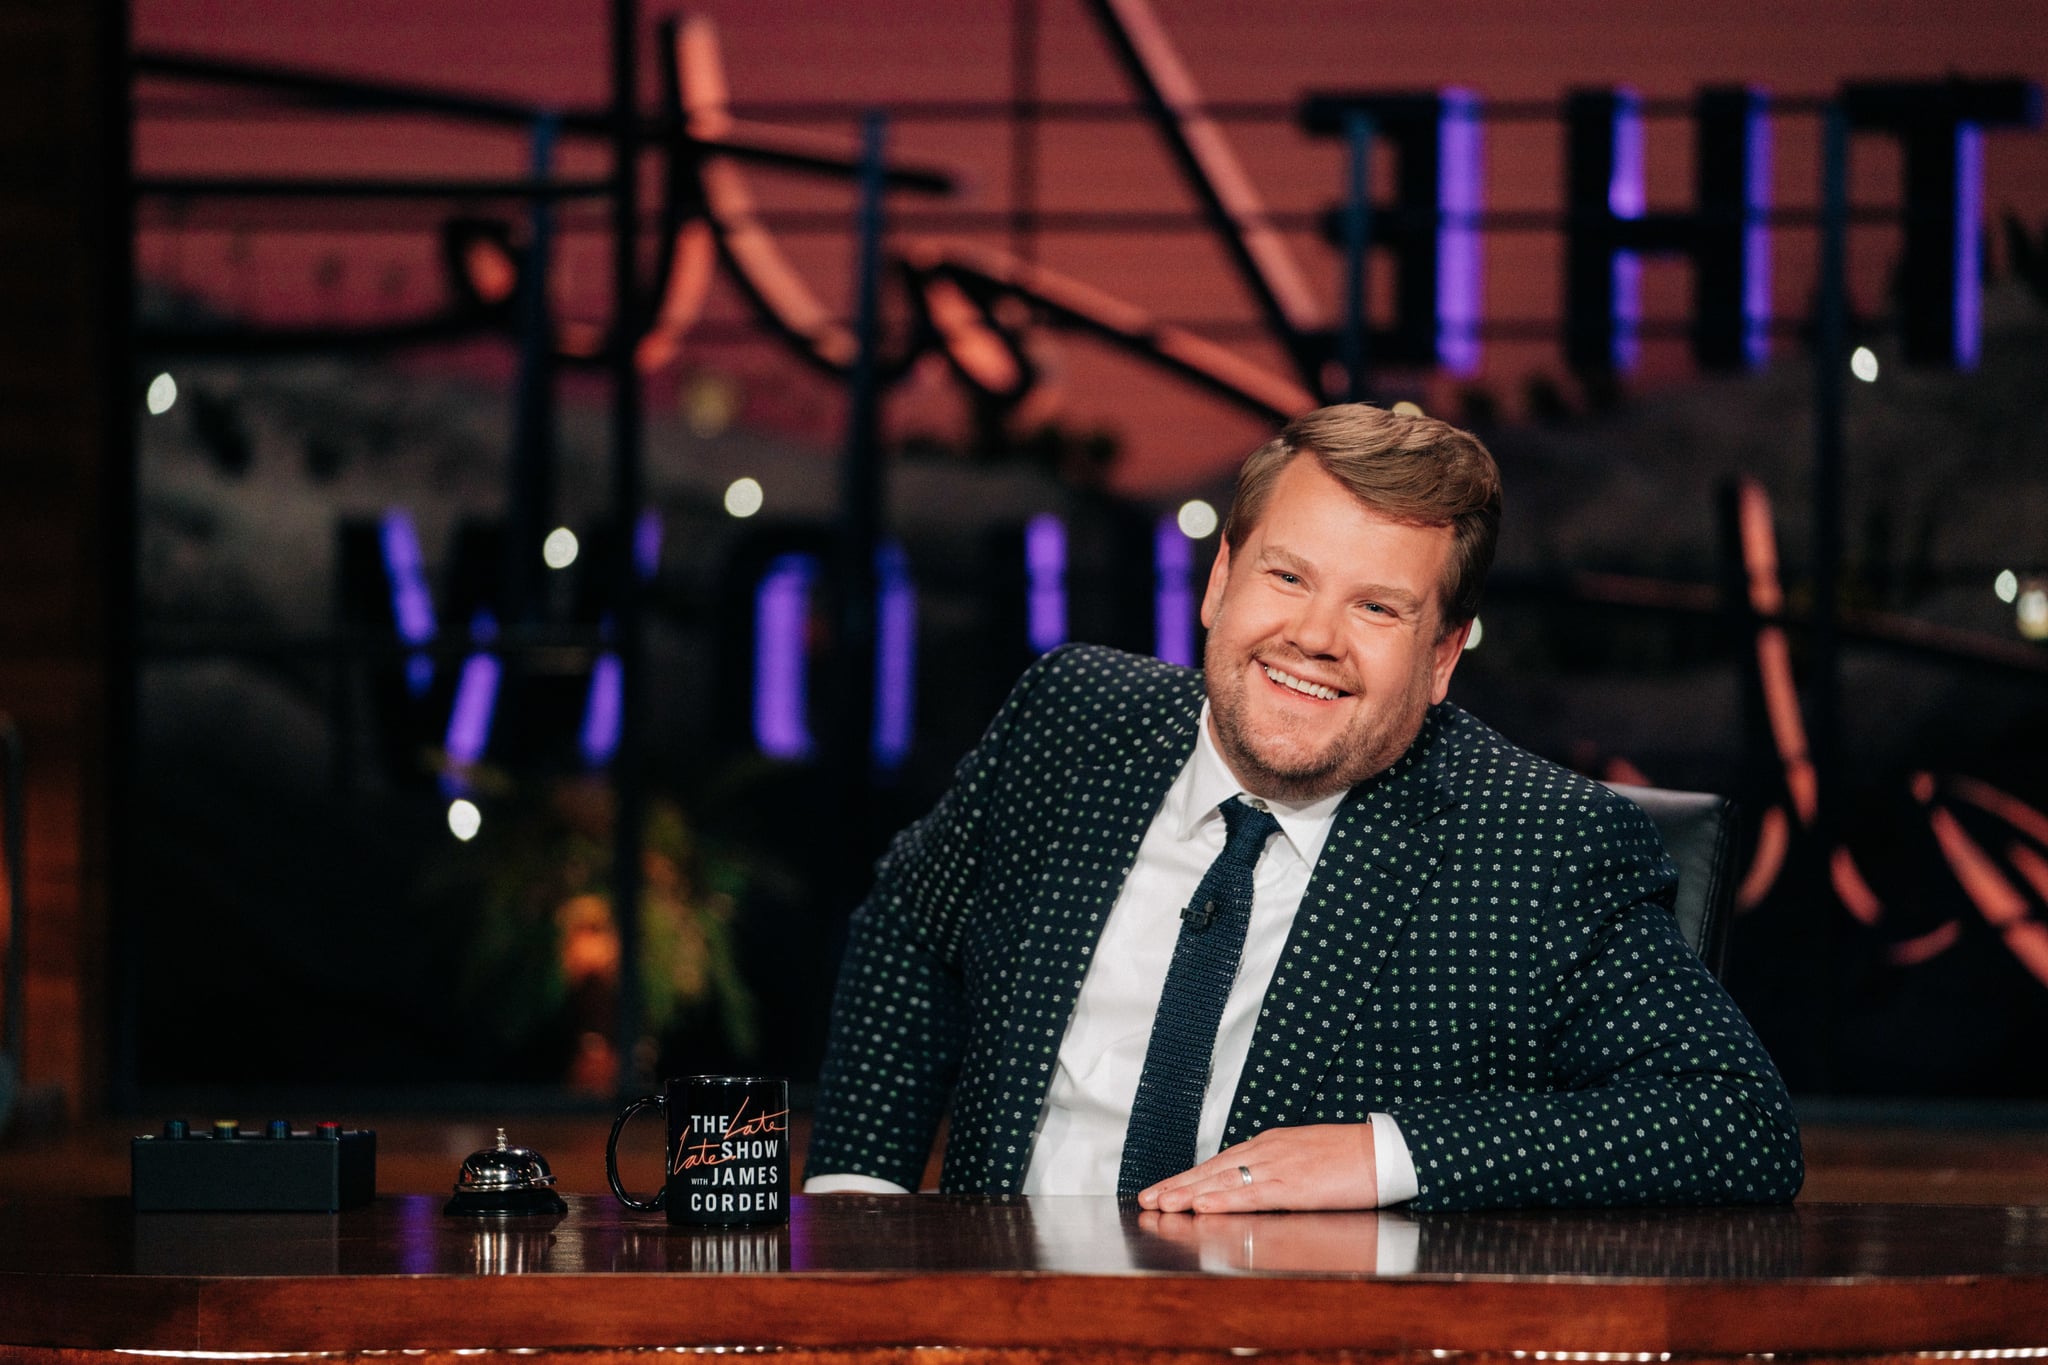 LOS ANGELES - OCTOBER 28: The Late Late Show with James Corden airing Wednesday, October 28, 2020, with guests Chelsea Handler and CL. (Photo by Terence Patrick/CBS via Getty Images)